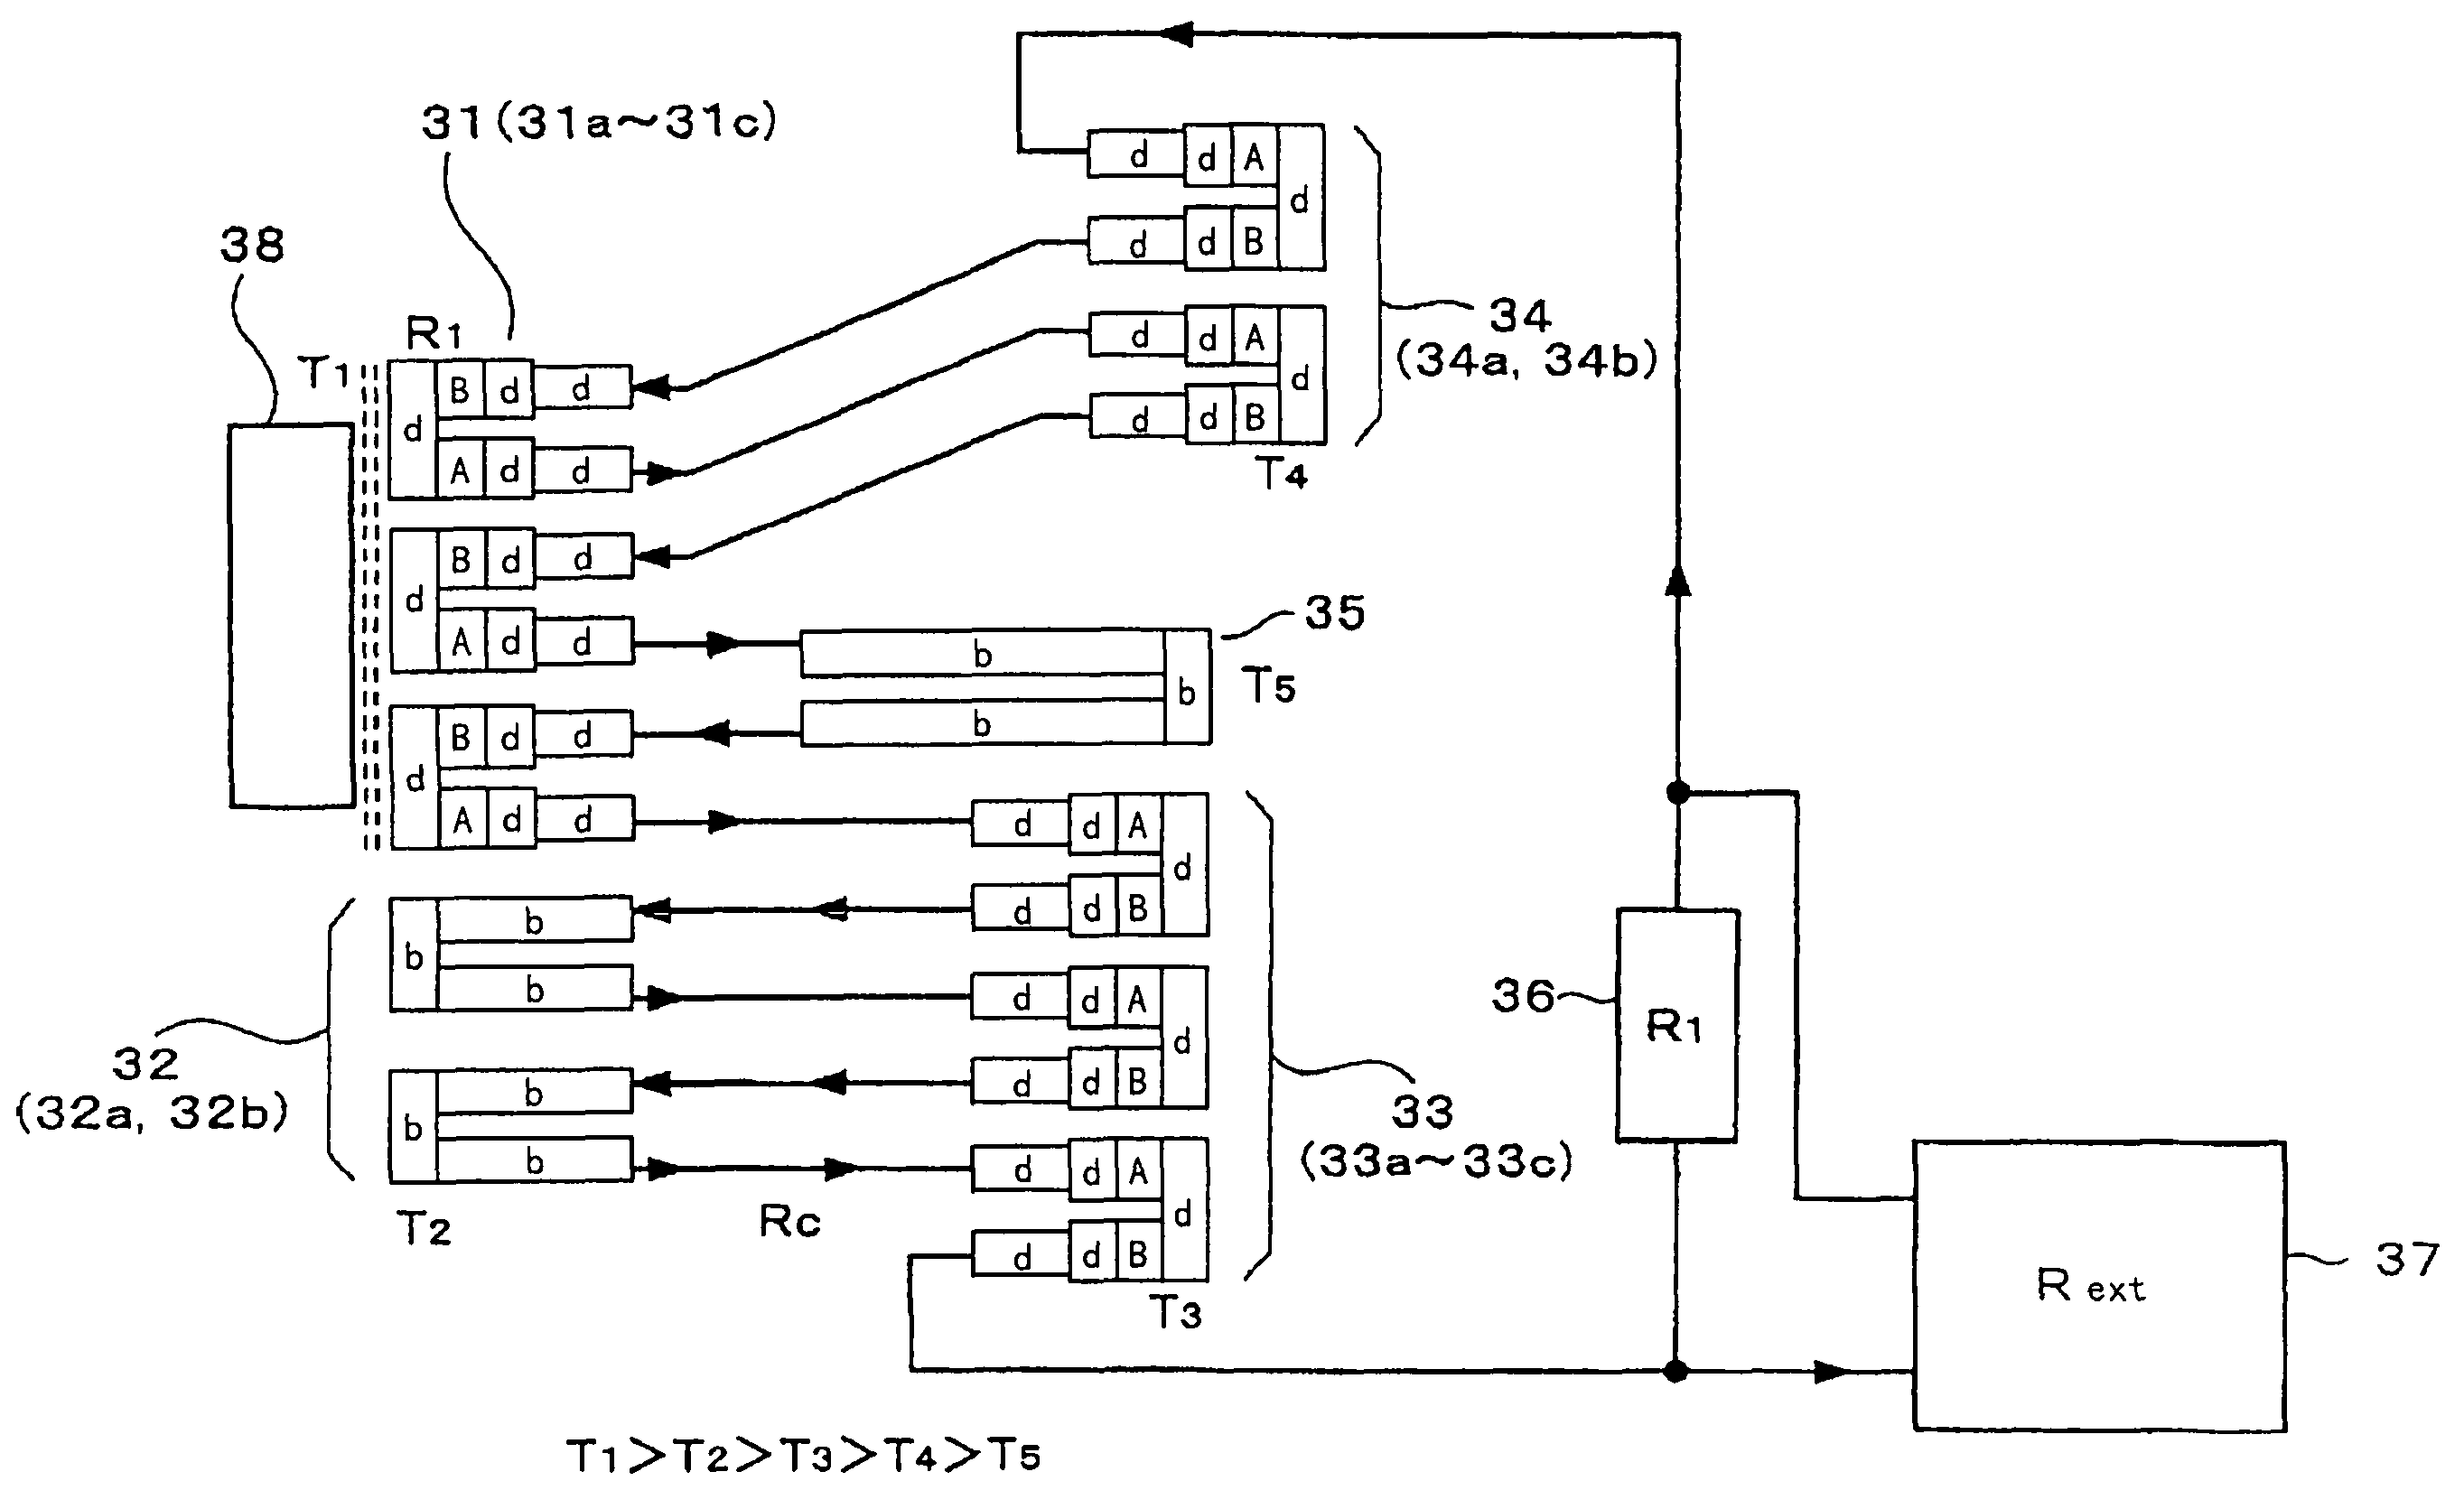 Thermal energy transfer circuit system